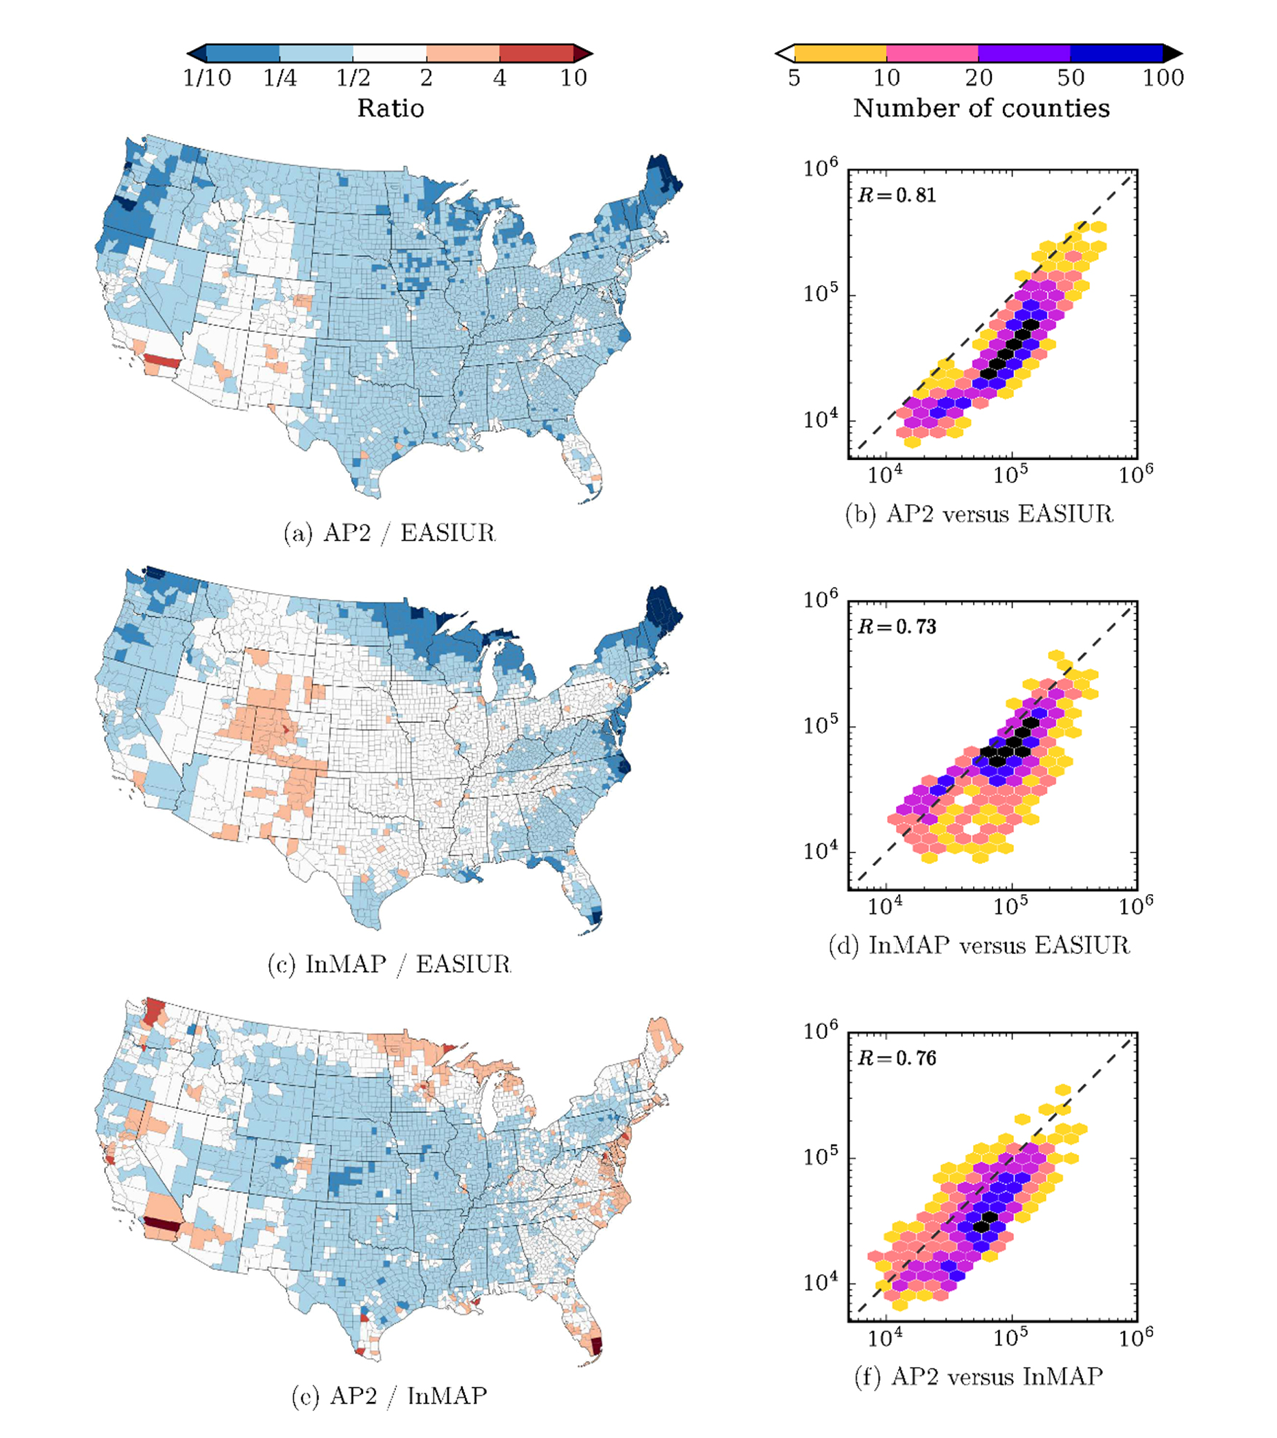 Maps showing air pollution in the United States and also counties